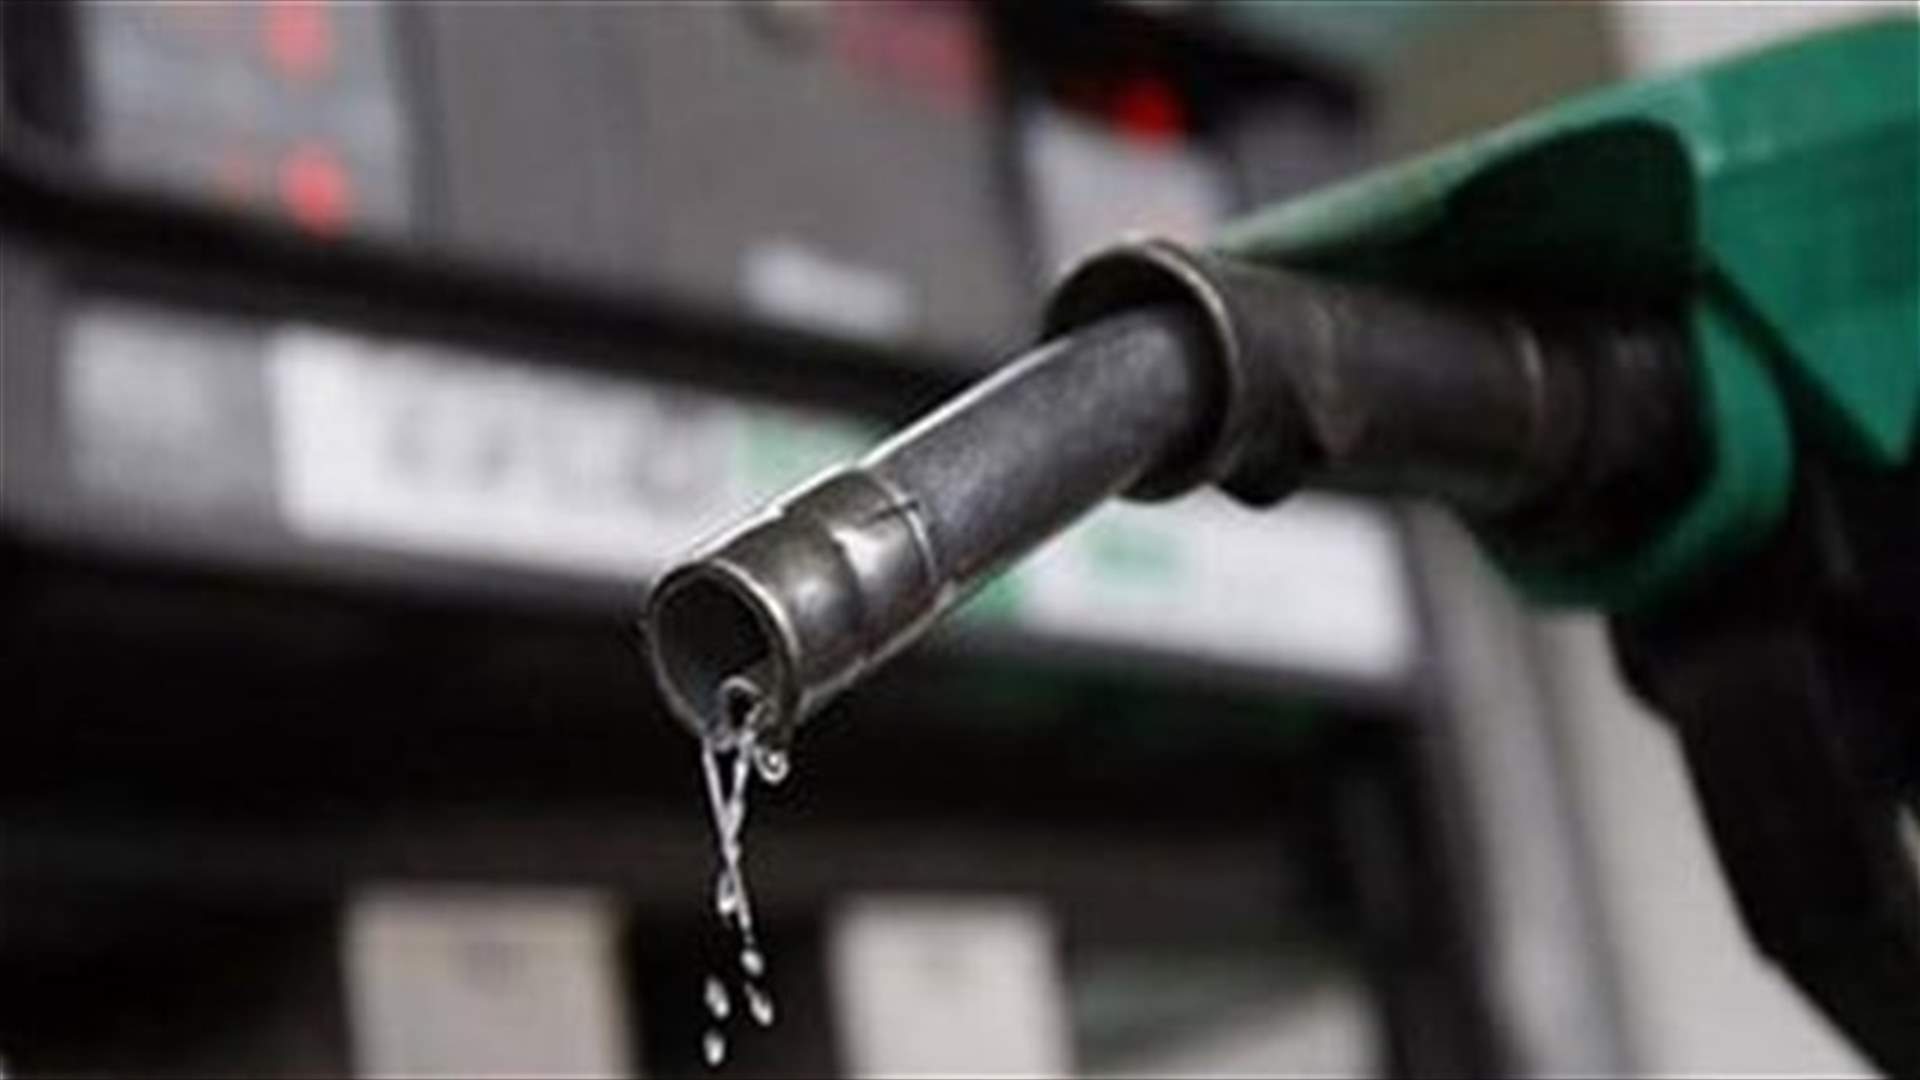 Gasoline price increases, diesel and gas prices remain unchanged